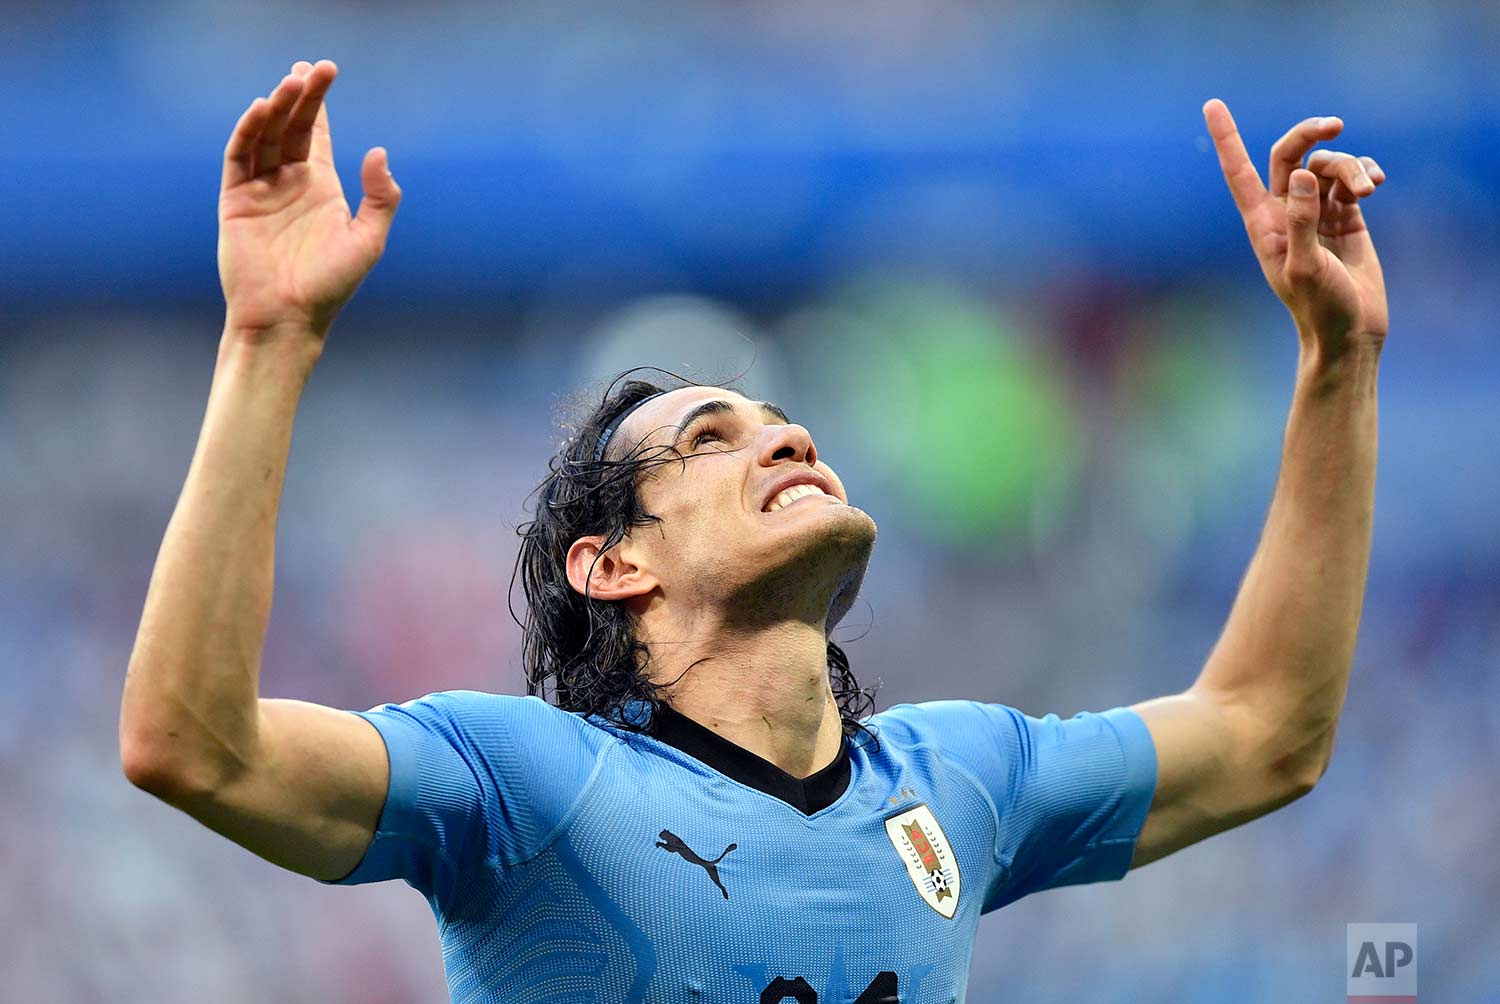  Uruguay's Edinson Cavani celebrates after scoring his team's third goal during the group A match between Uruguay and Russia at the 2018 soccer World Cup at the Samara Arena in Samara, Russia, Monday, June 25, 2018. (AP Photo/Martin Meissner) 